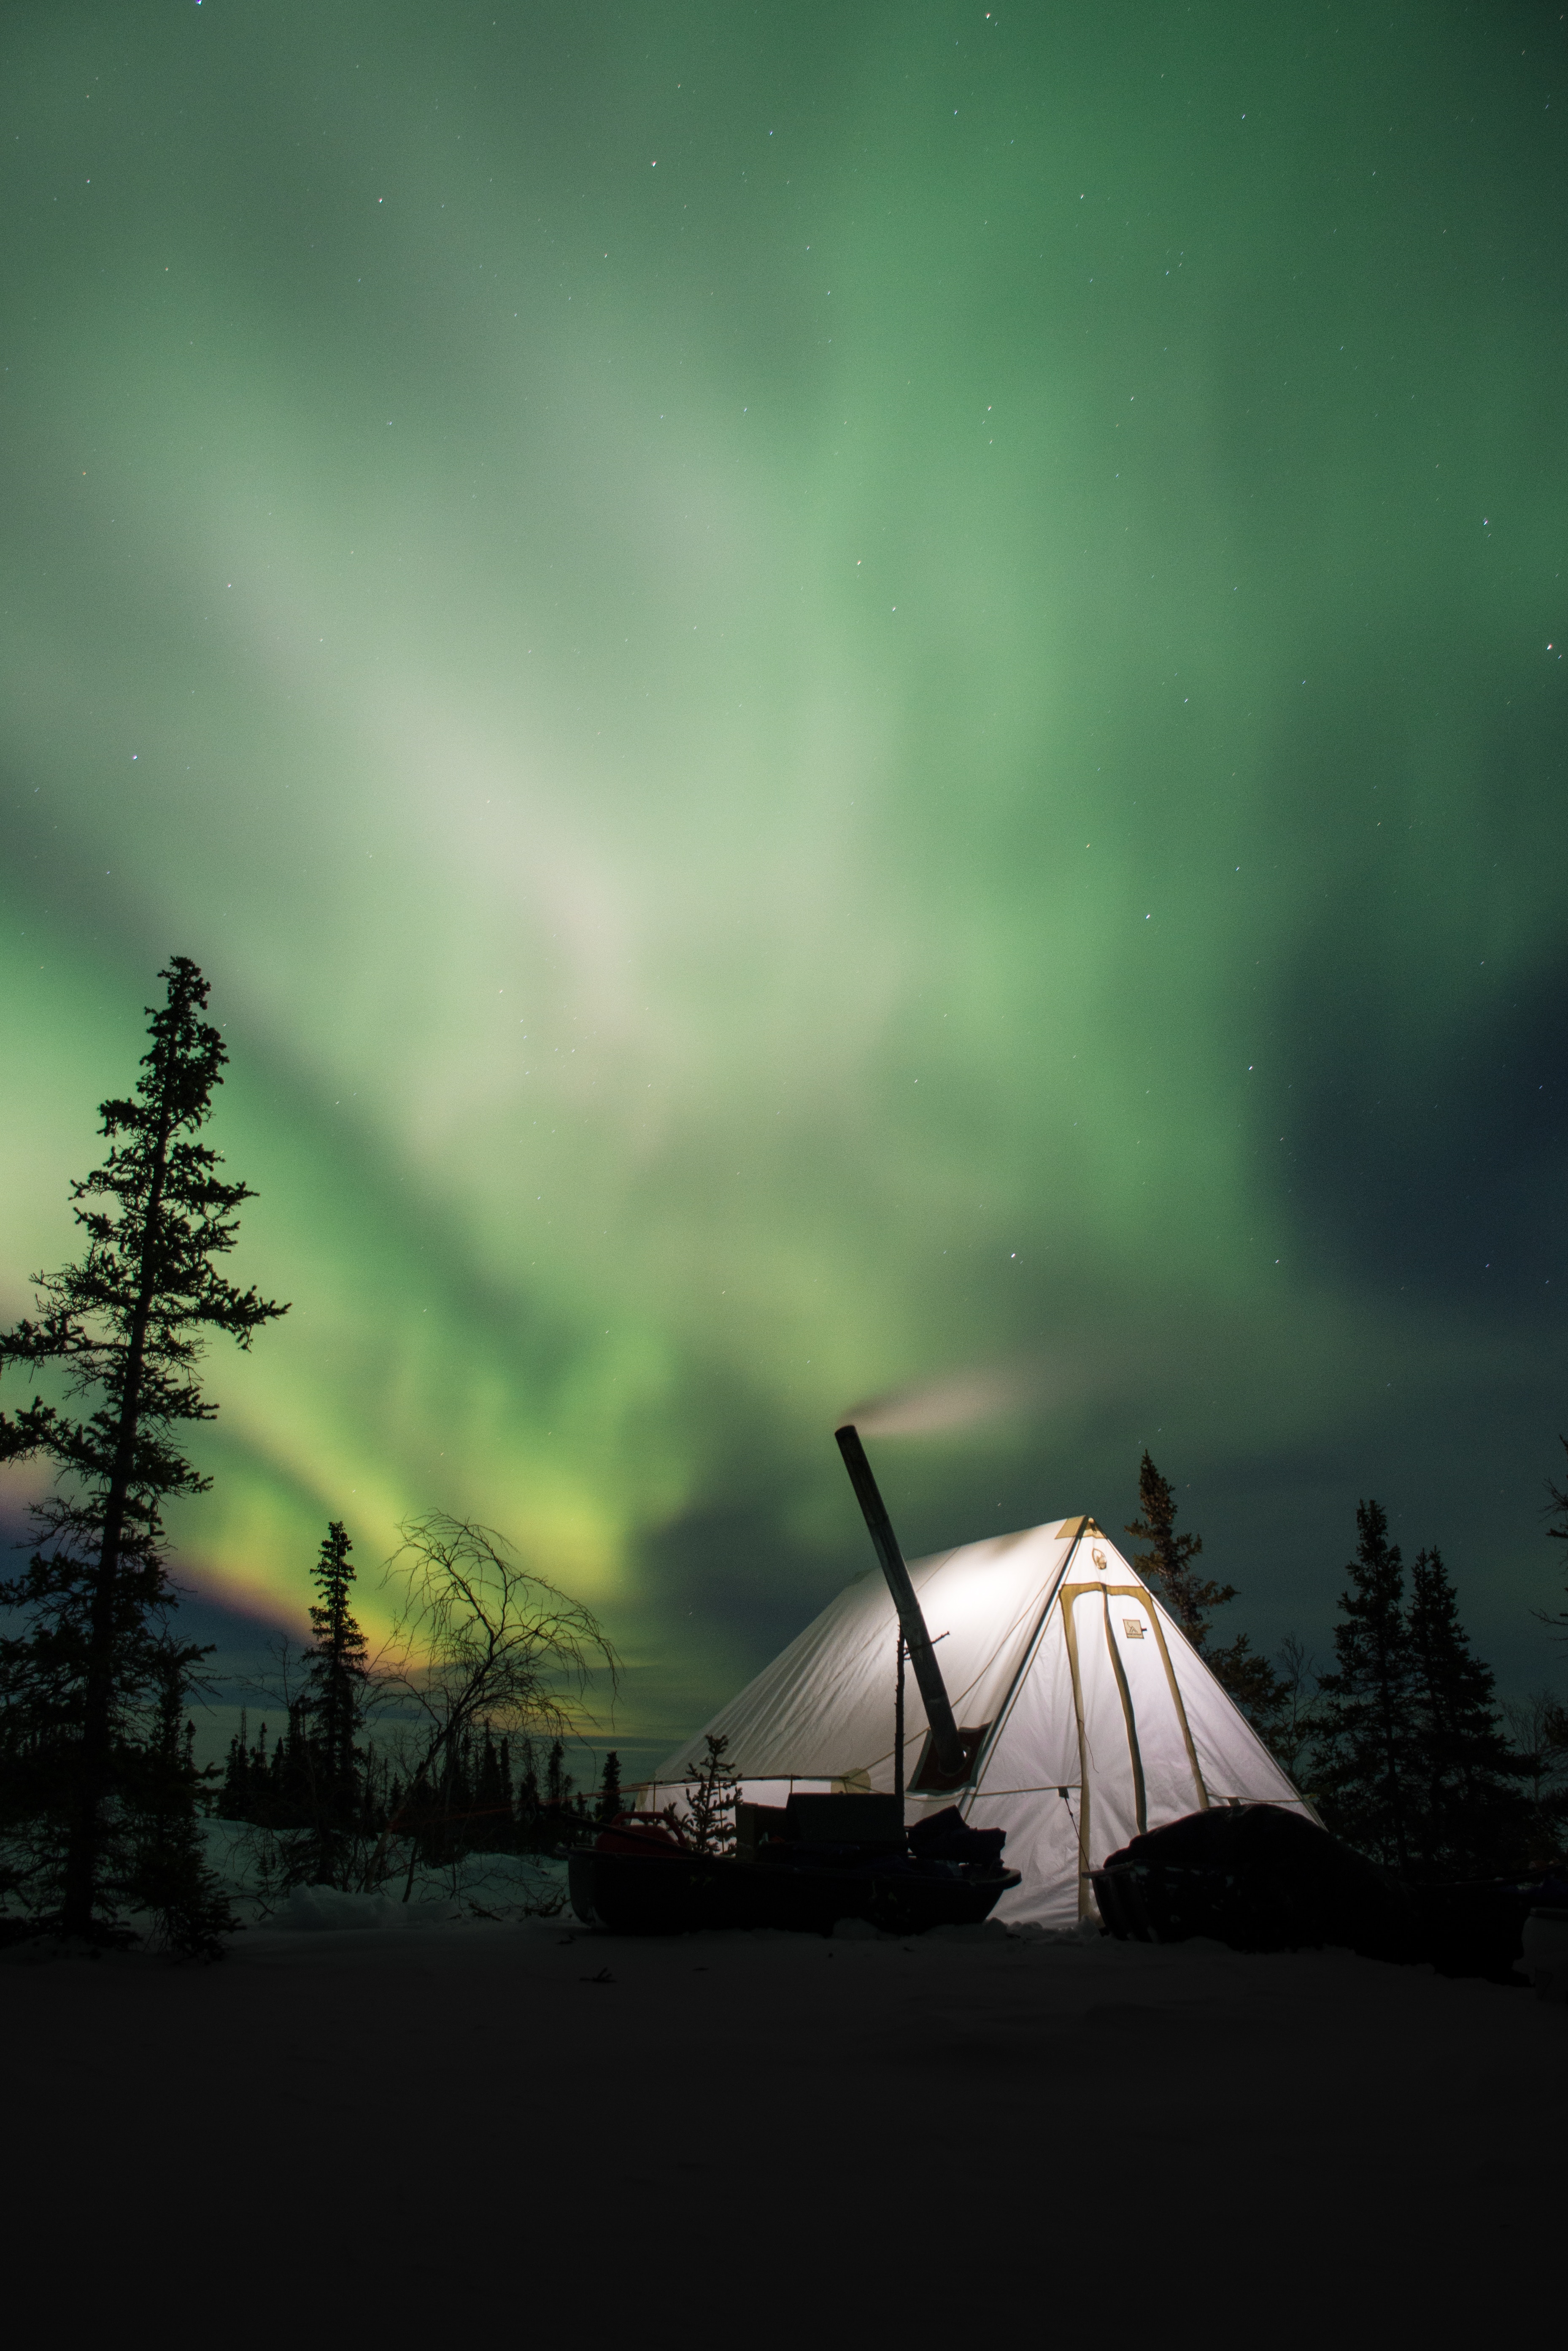 aurora borealis, aurora, tent, nature, night, northern lights, camping, campsite cell phone wallpapers